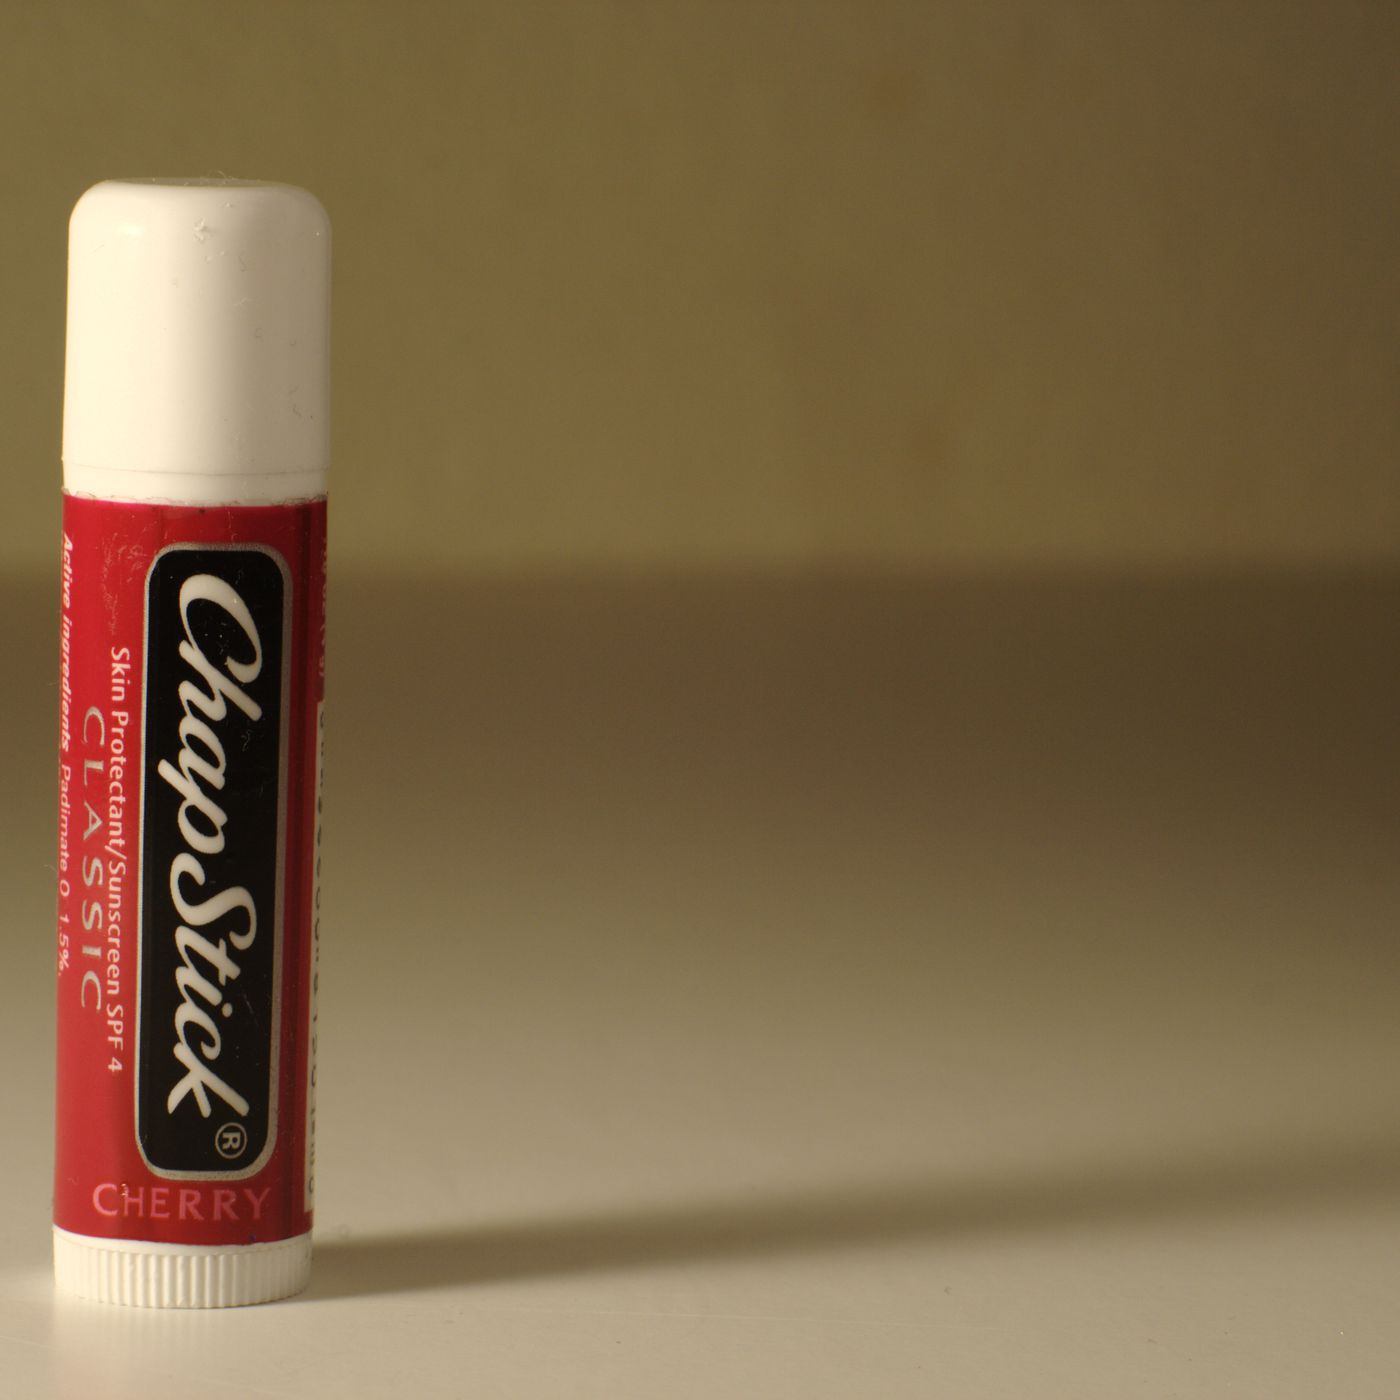 It's true: ChapStick can be habit-forming for some people - Vox